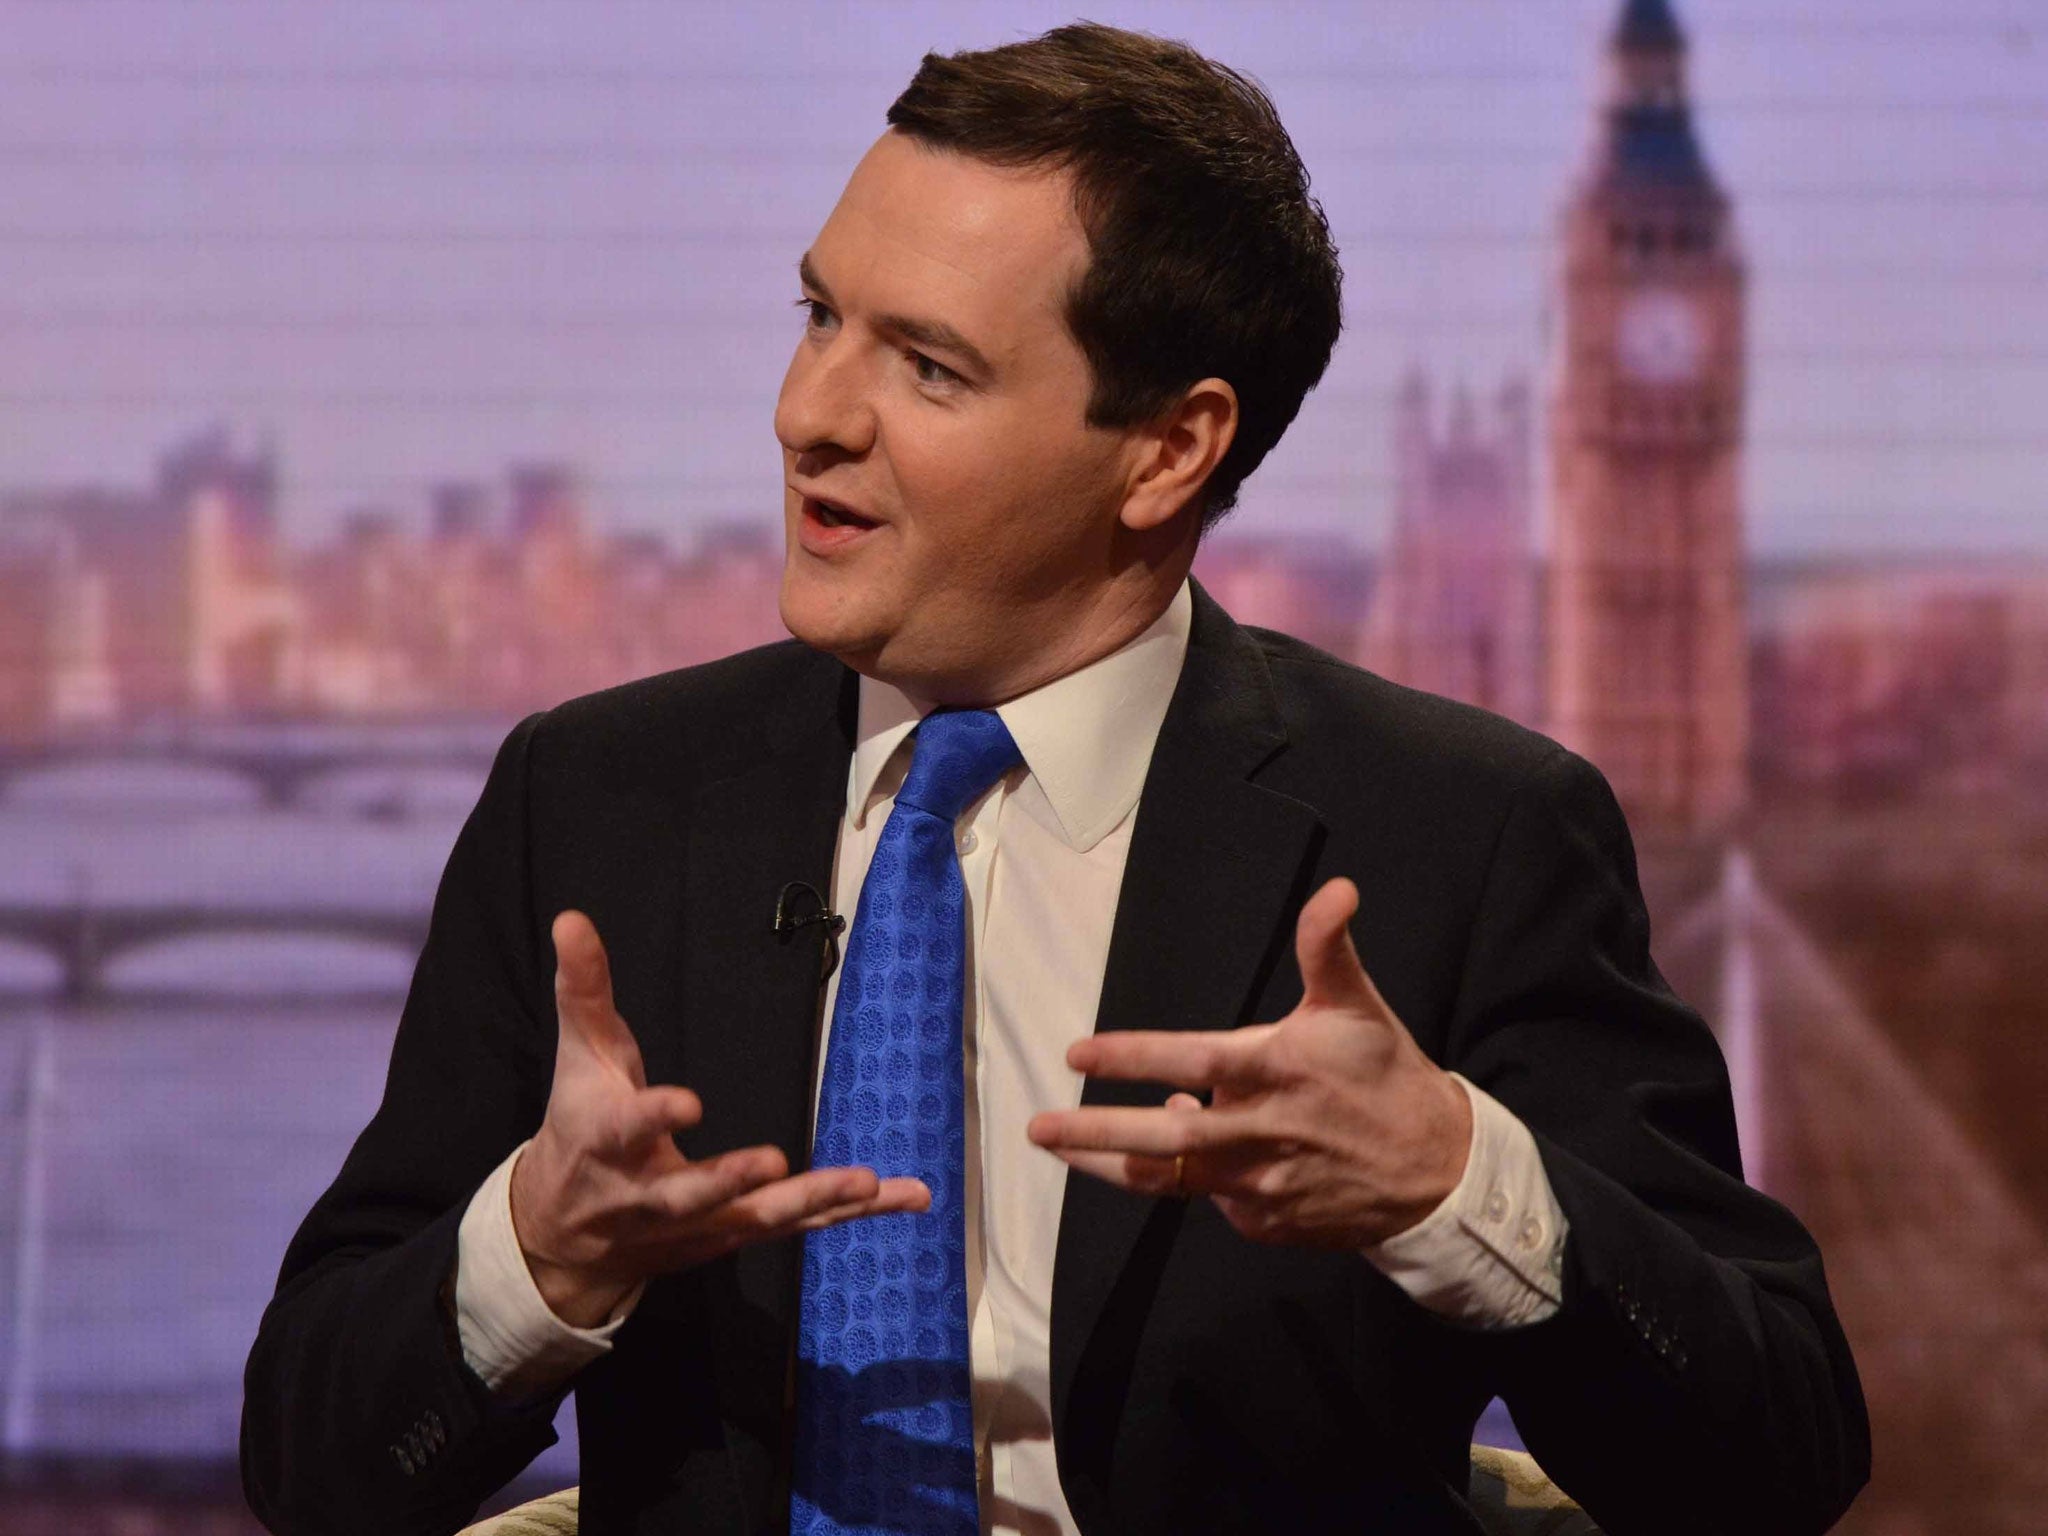 George Osborne has been accused of burying a 'stealth cut' in the Autumn statement